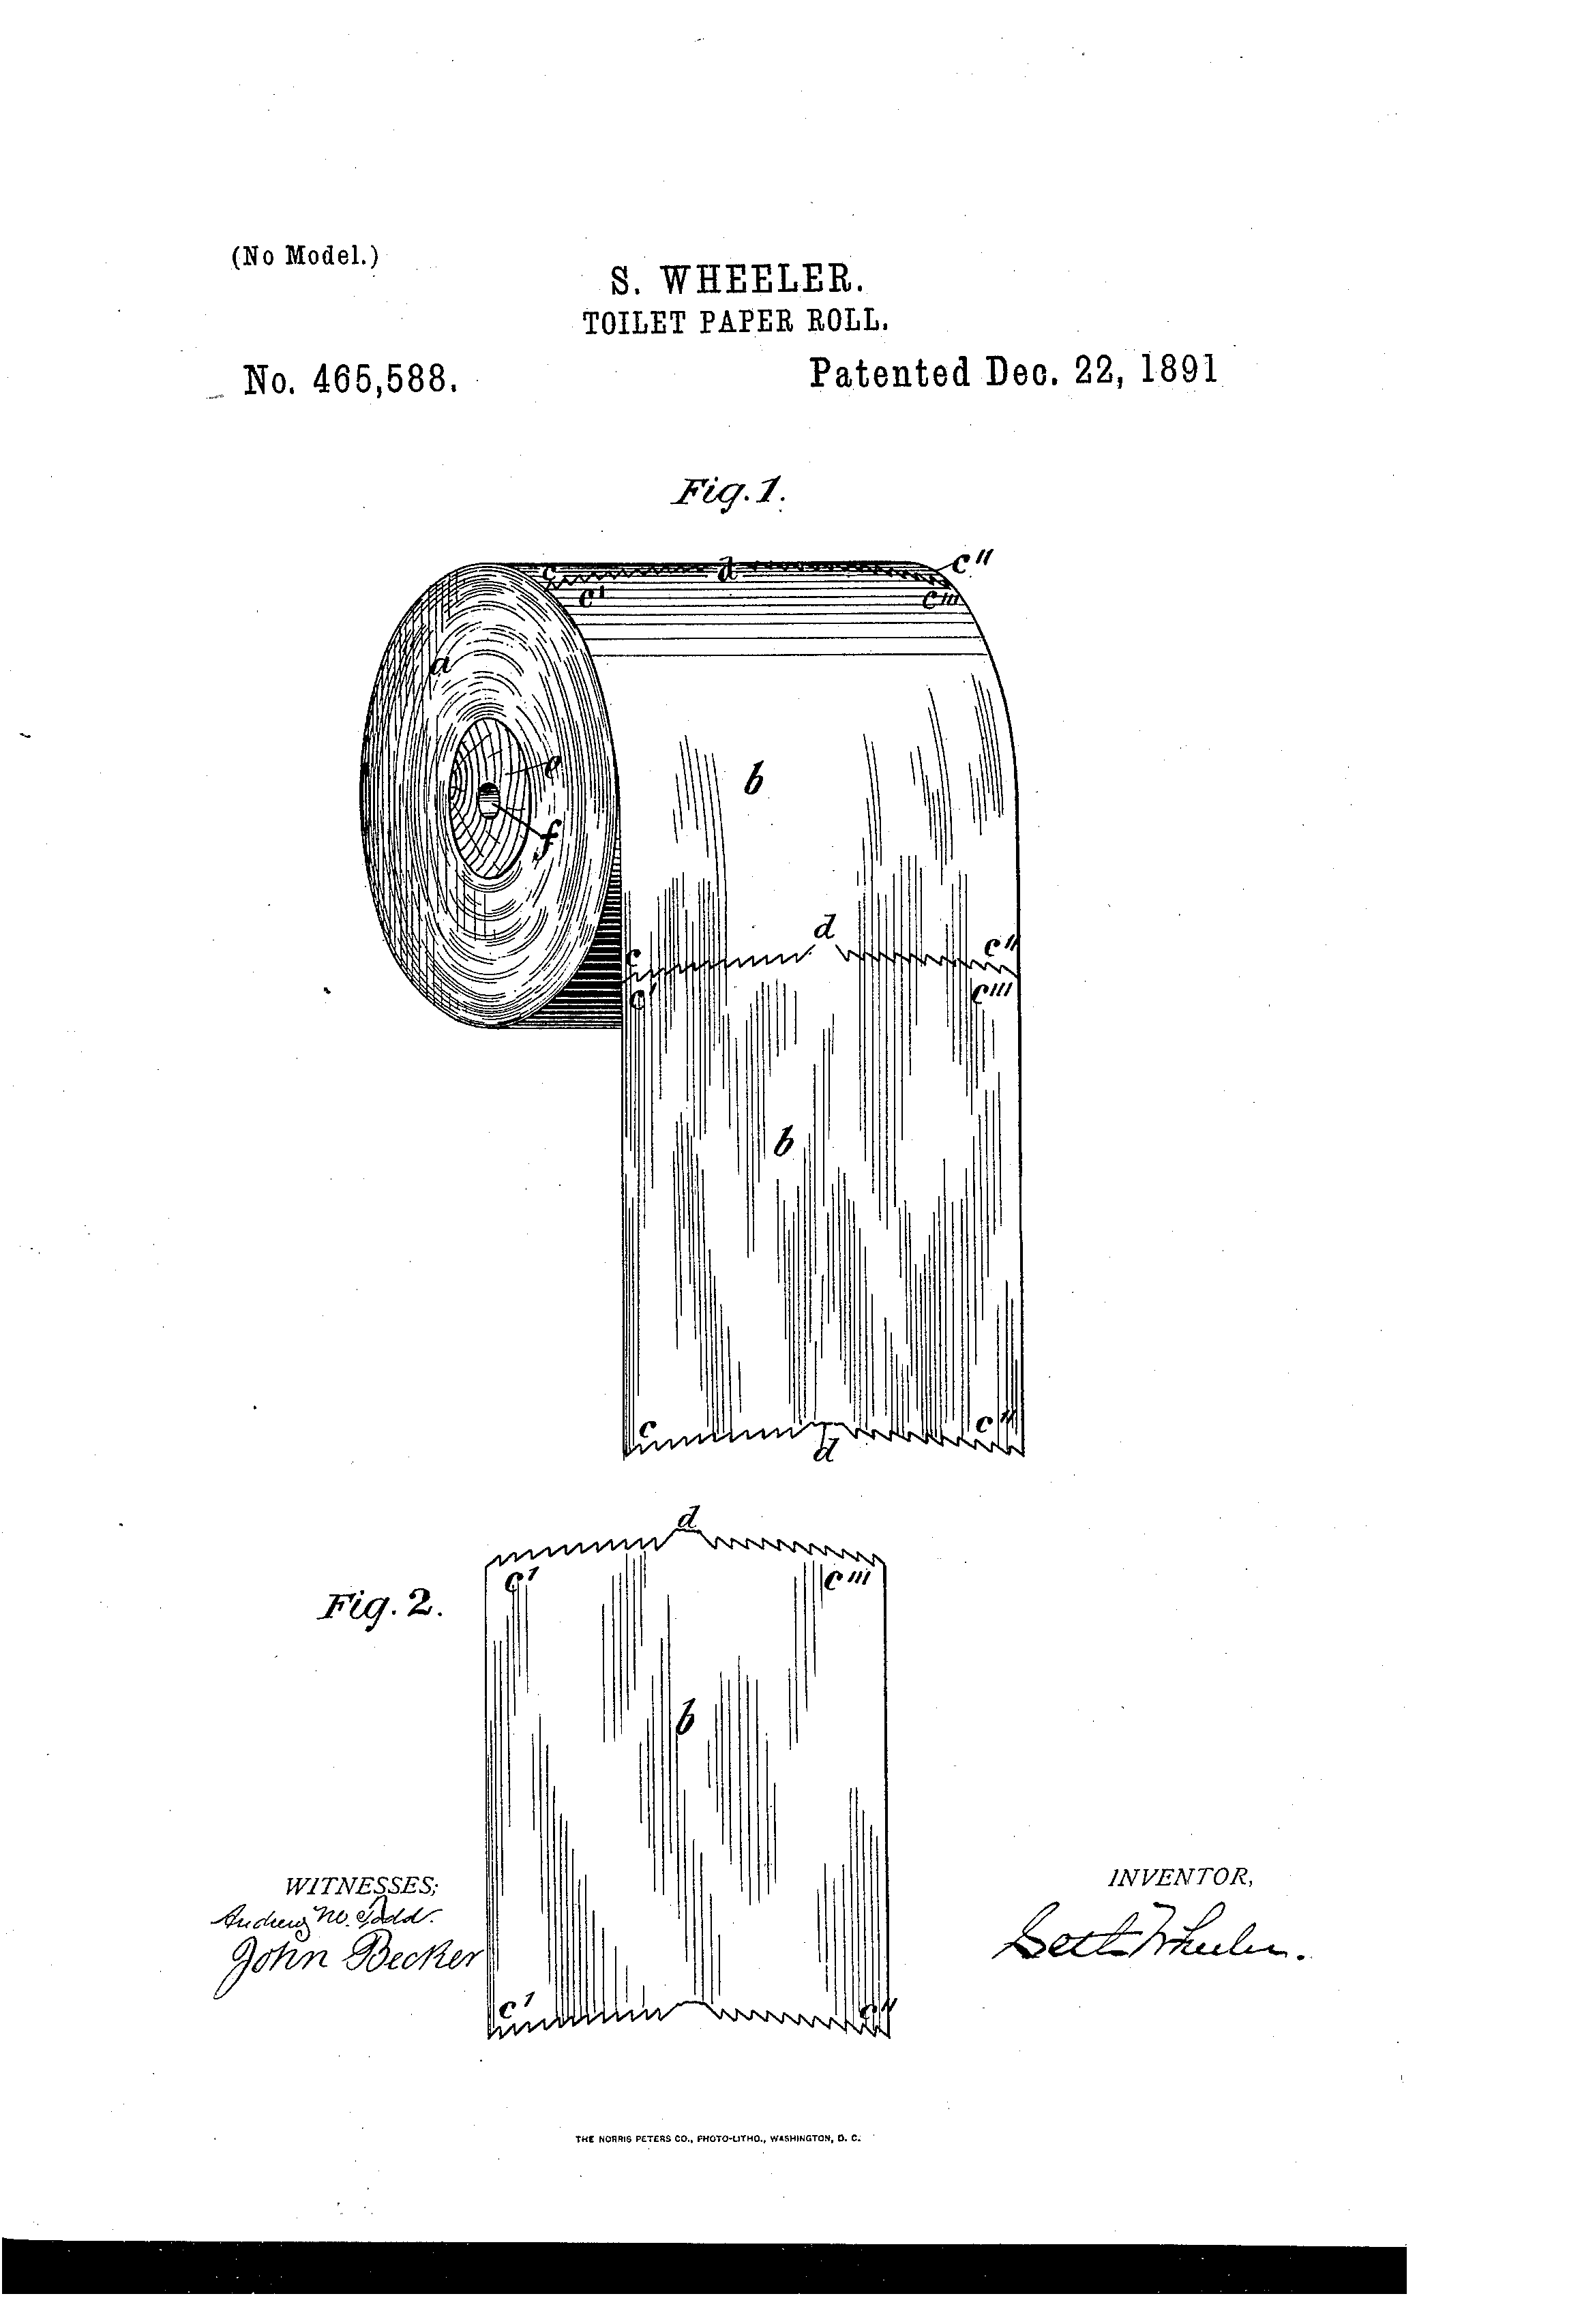 Toilet-paper-roll-patent-US465588-0.png